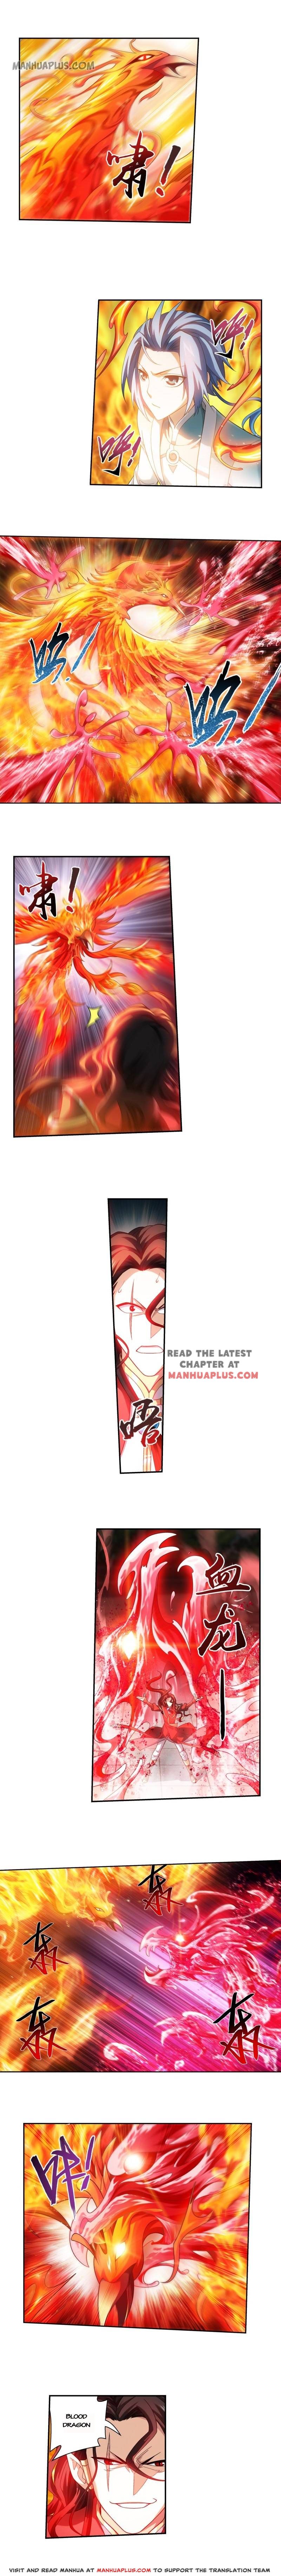 The Great Ruler Chap 185